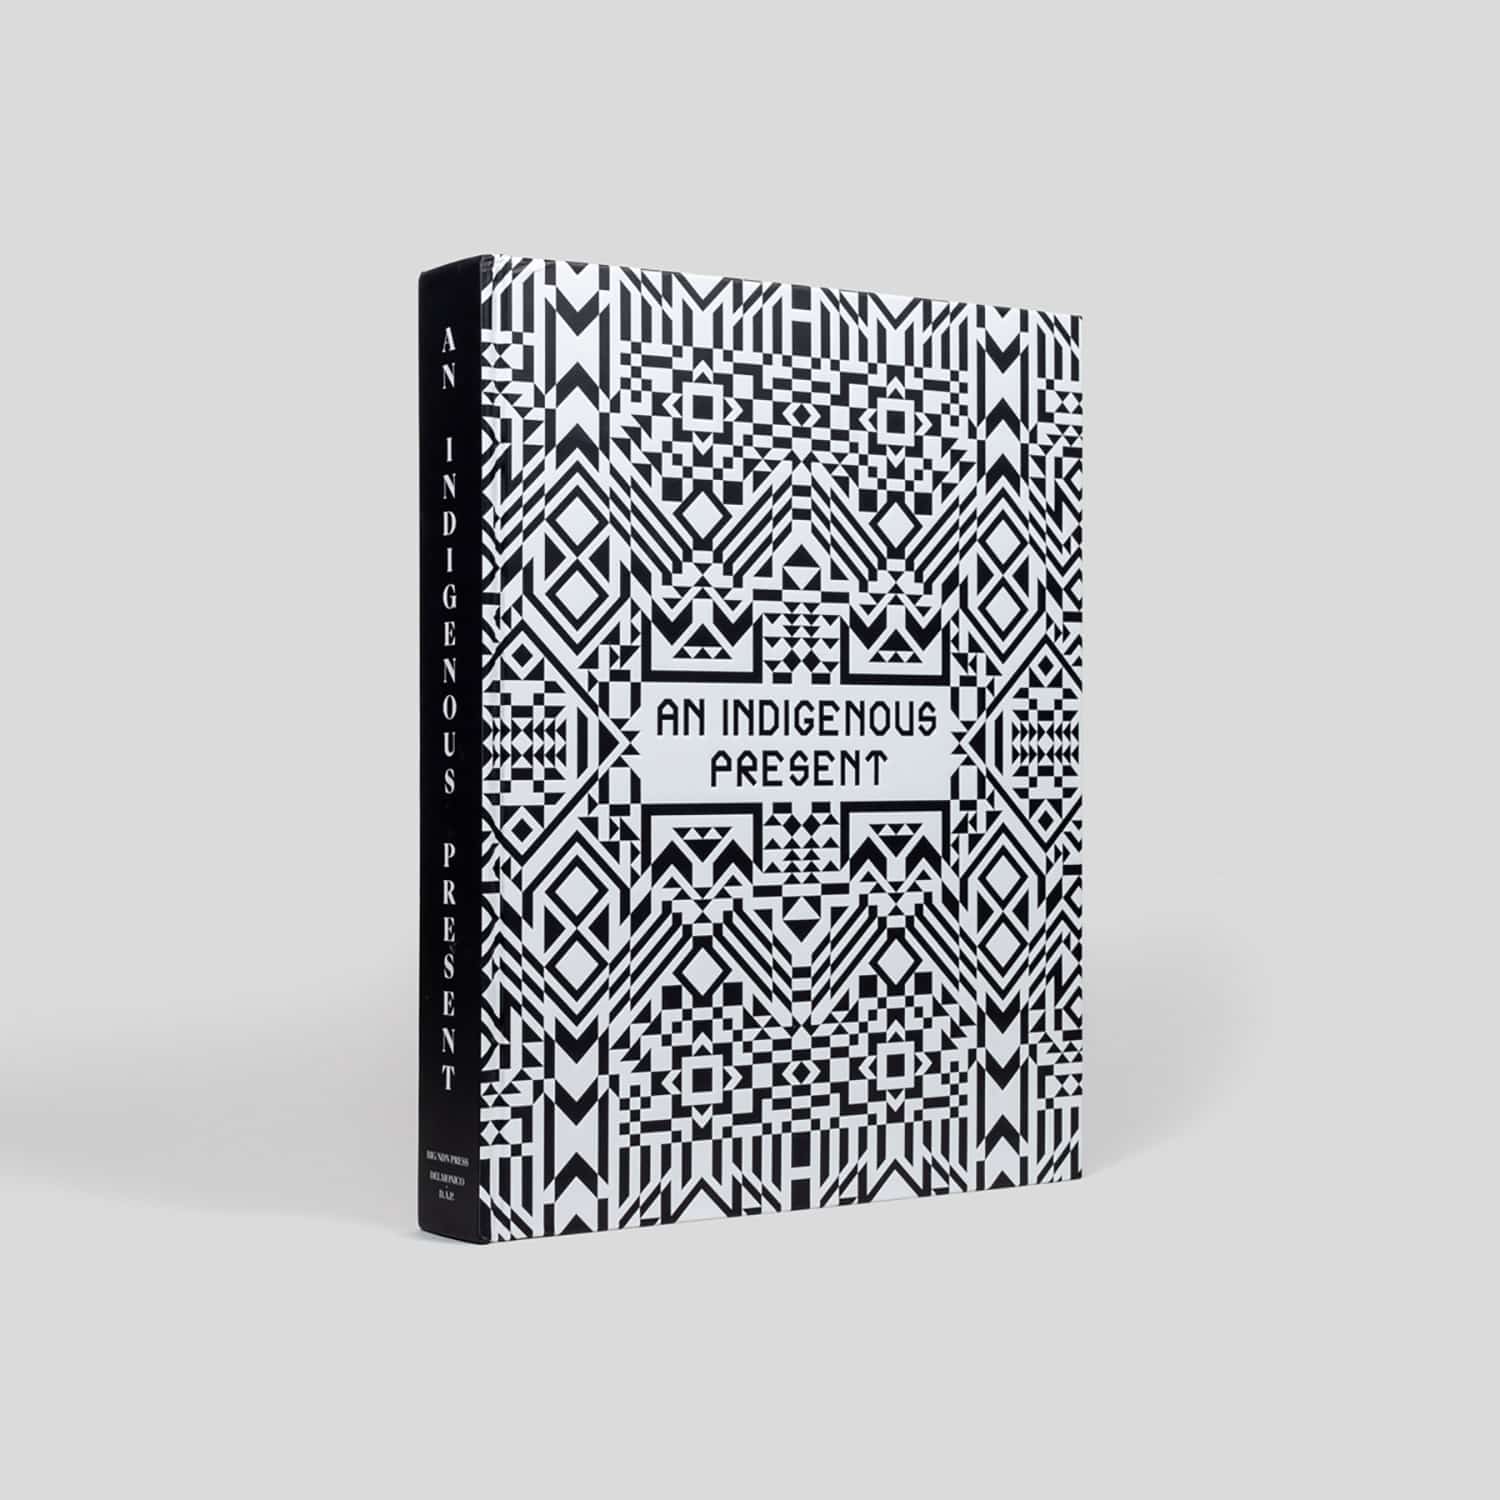 Book with elaborate black and white patterned cover and title 'An Indigenous Present'